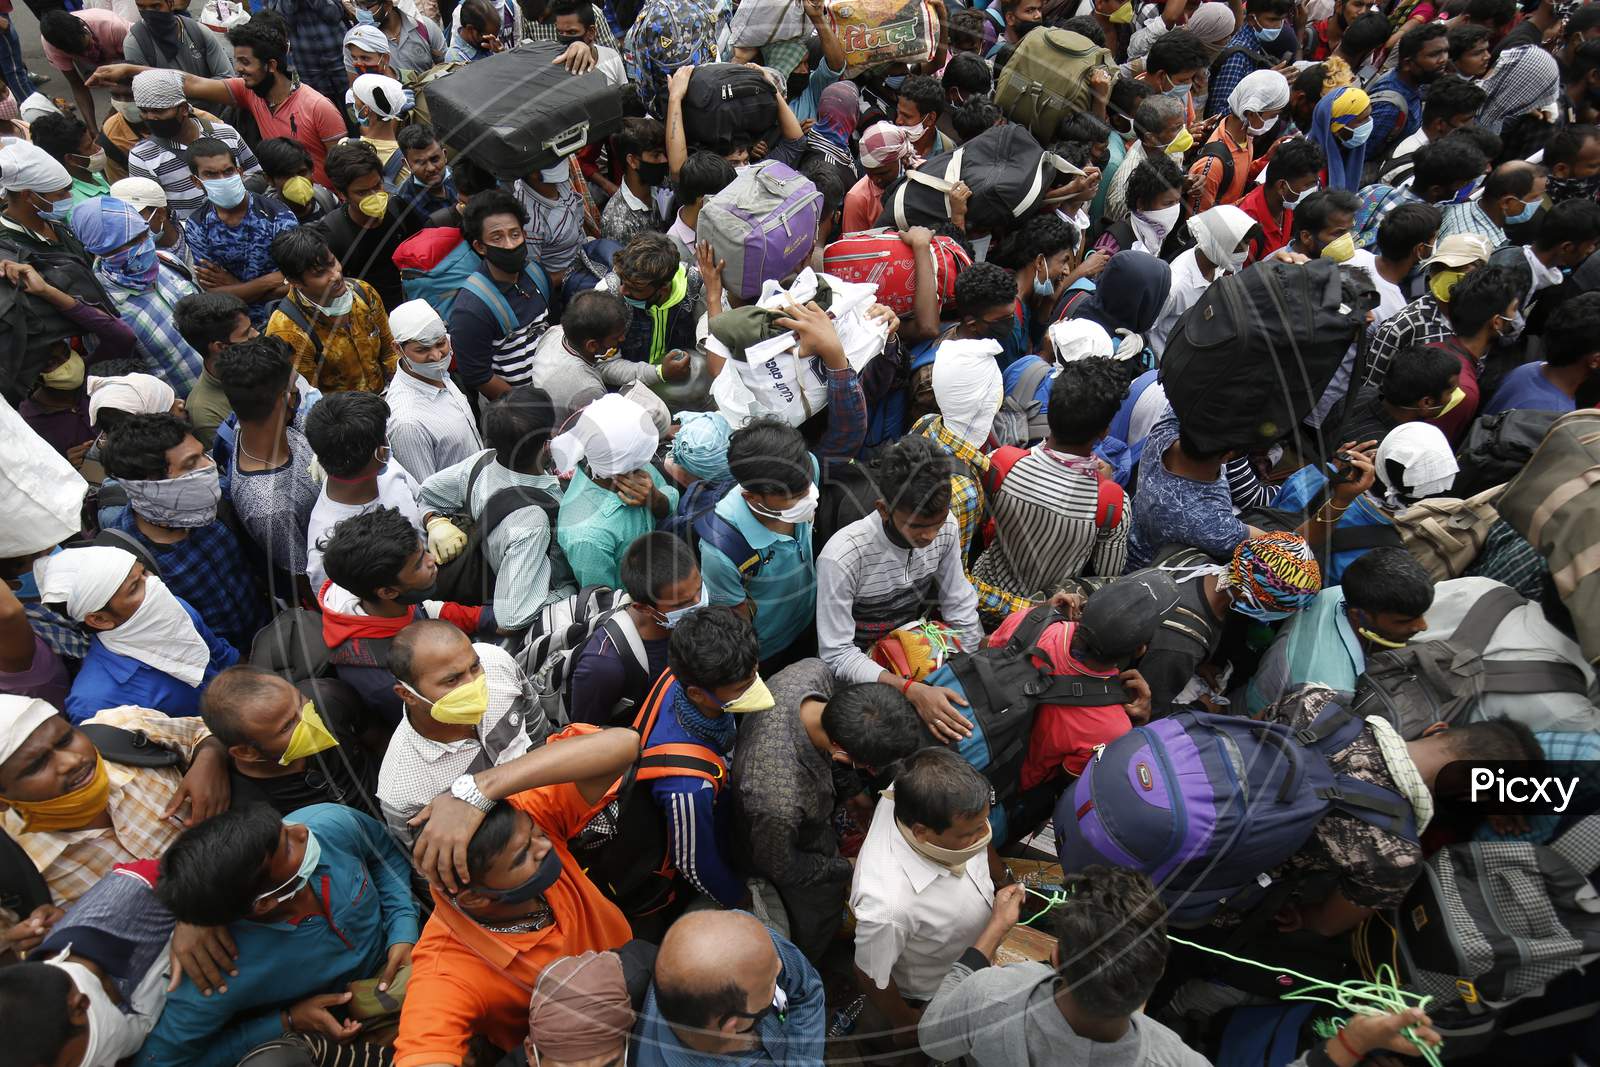 Migrant workers from Odisha wait for a health screening before boarding buses to be taken to a government-arranged train to their destination after the state eased lockdown regulations during the extended nationwide lockdown to prevent the spread of coronavirus (Covid-19) in Bangalore, India.